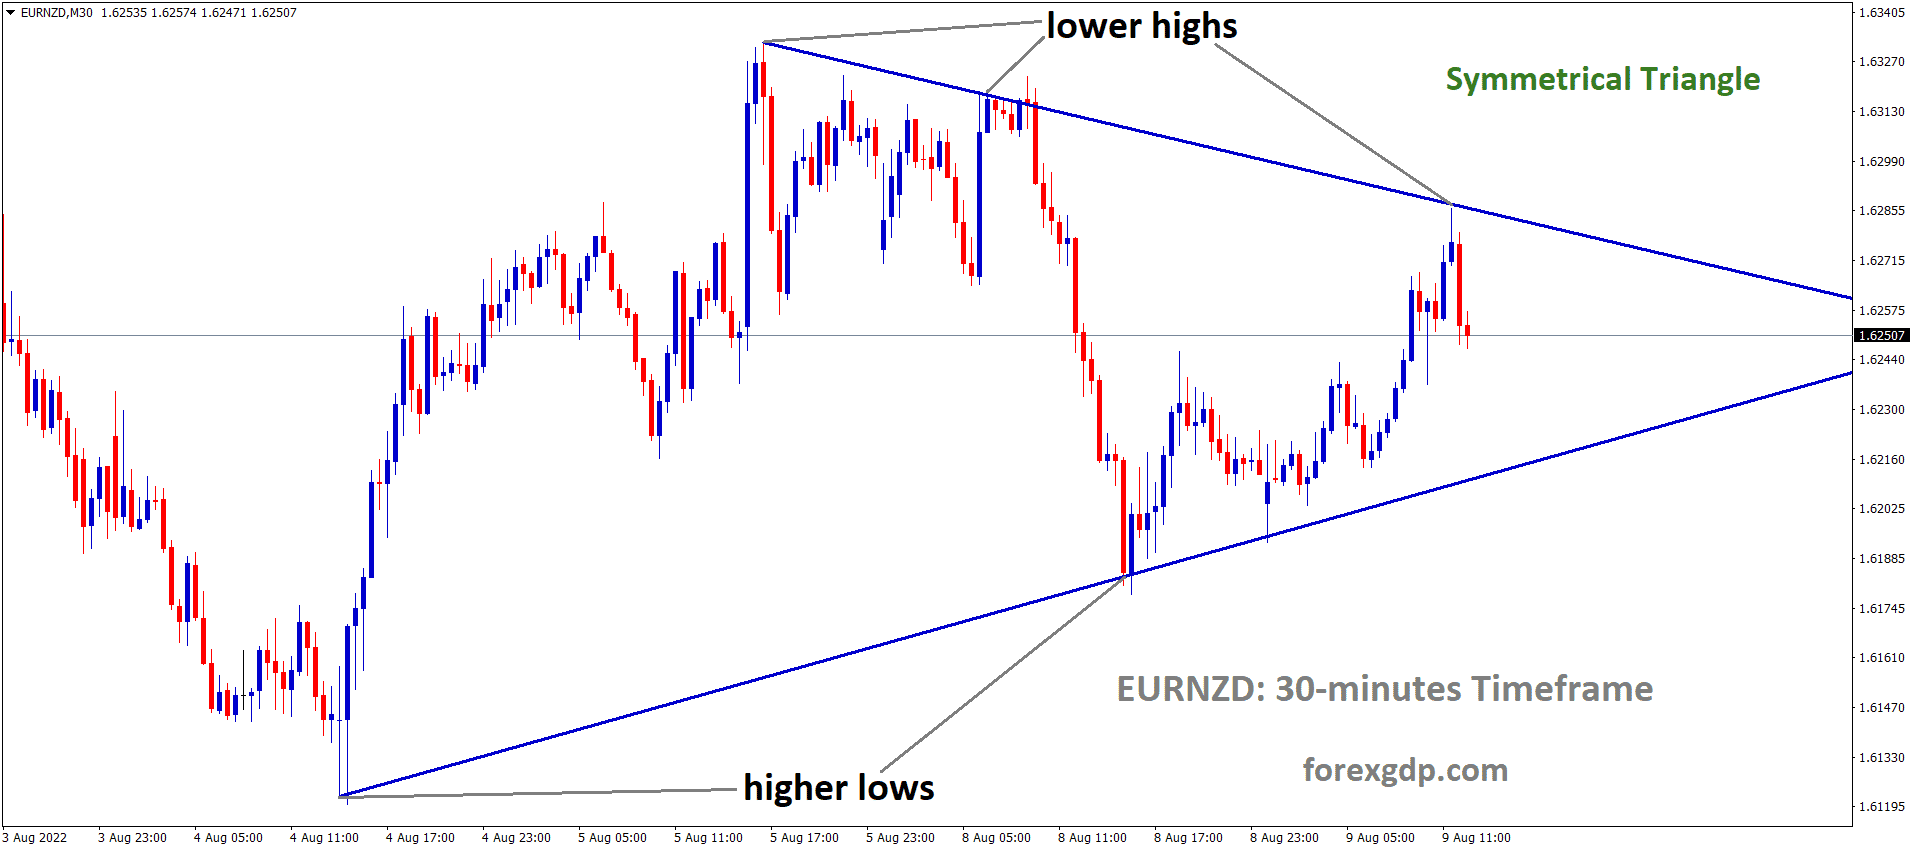 EURNZD is moving in the symmetrical triangle pattern and the market has fallen from the Top area of the pattern